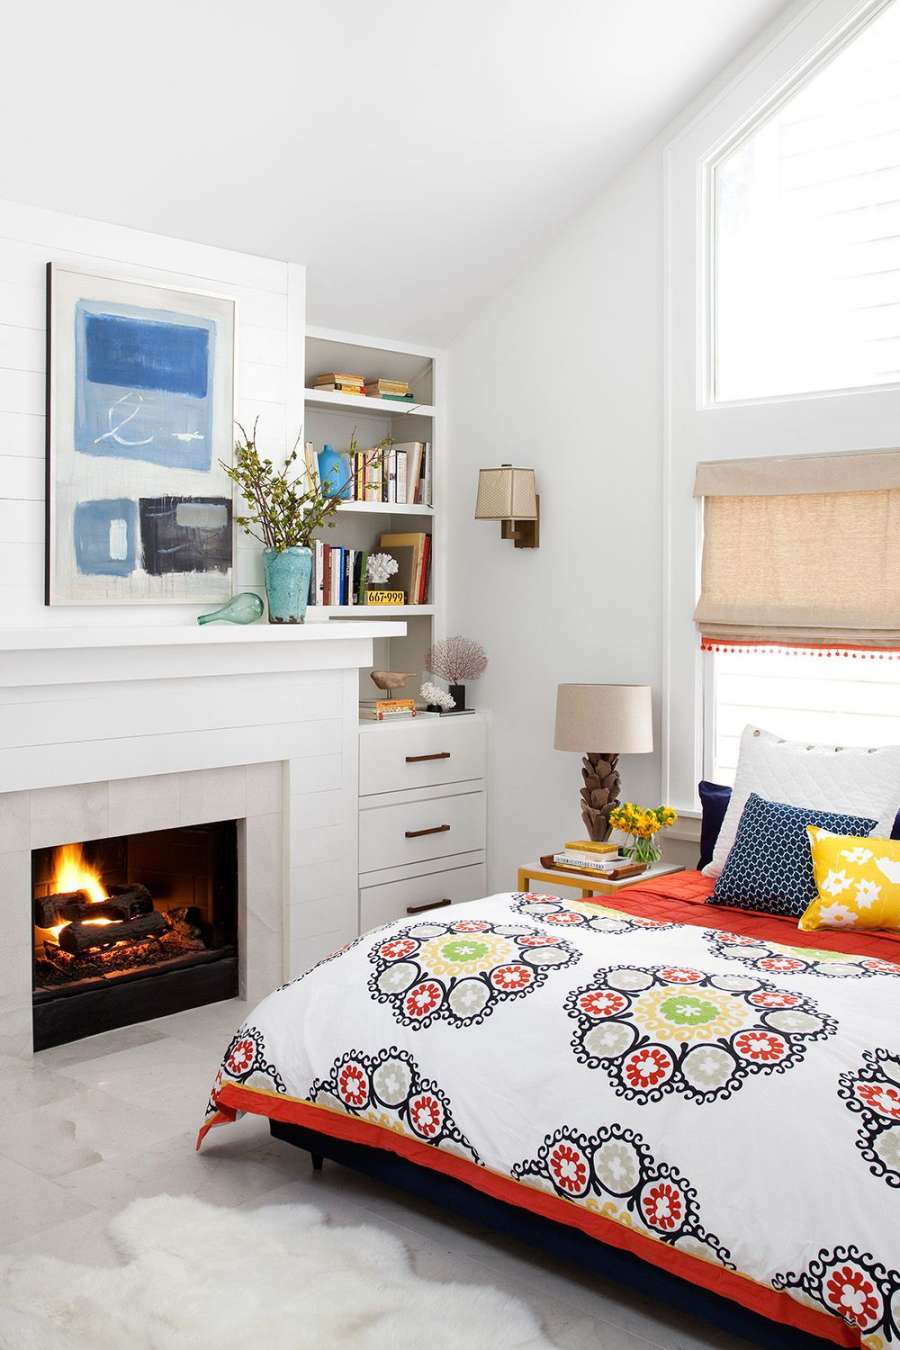 Bedroom Fireplace Ideas to Cozy Up Your Space